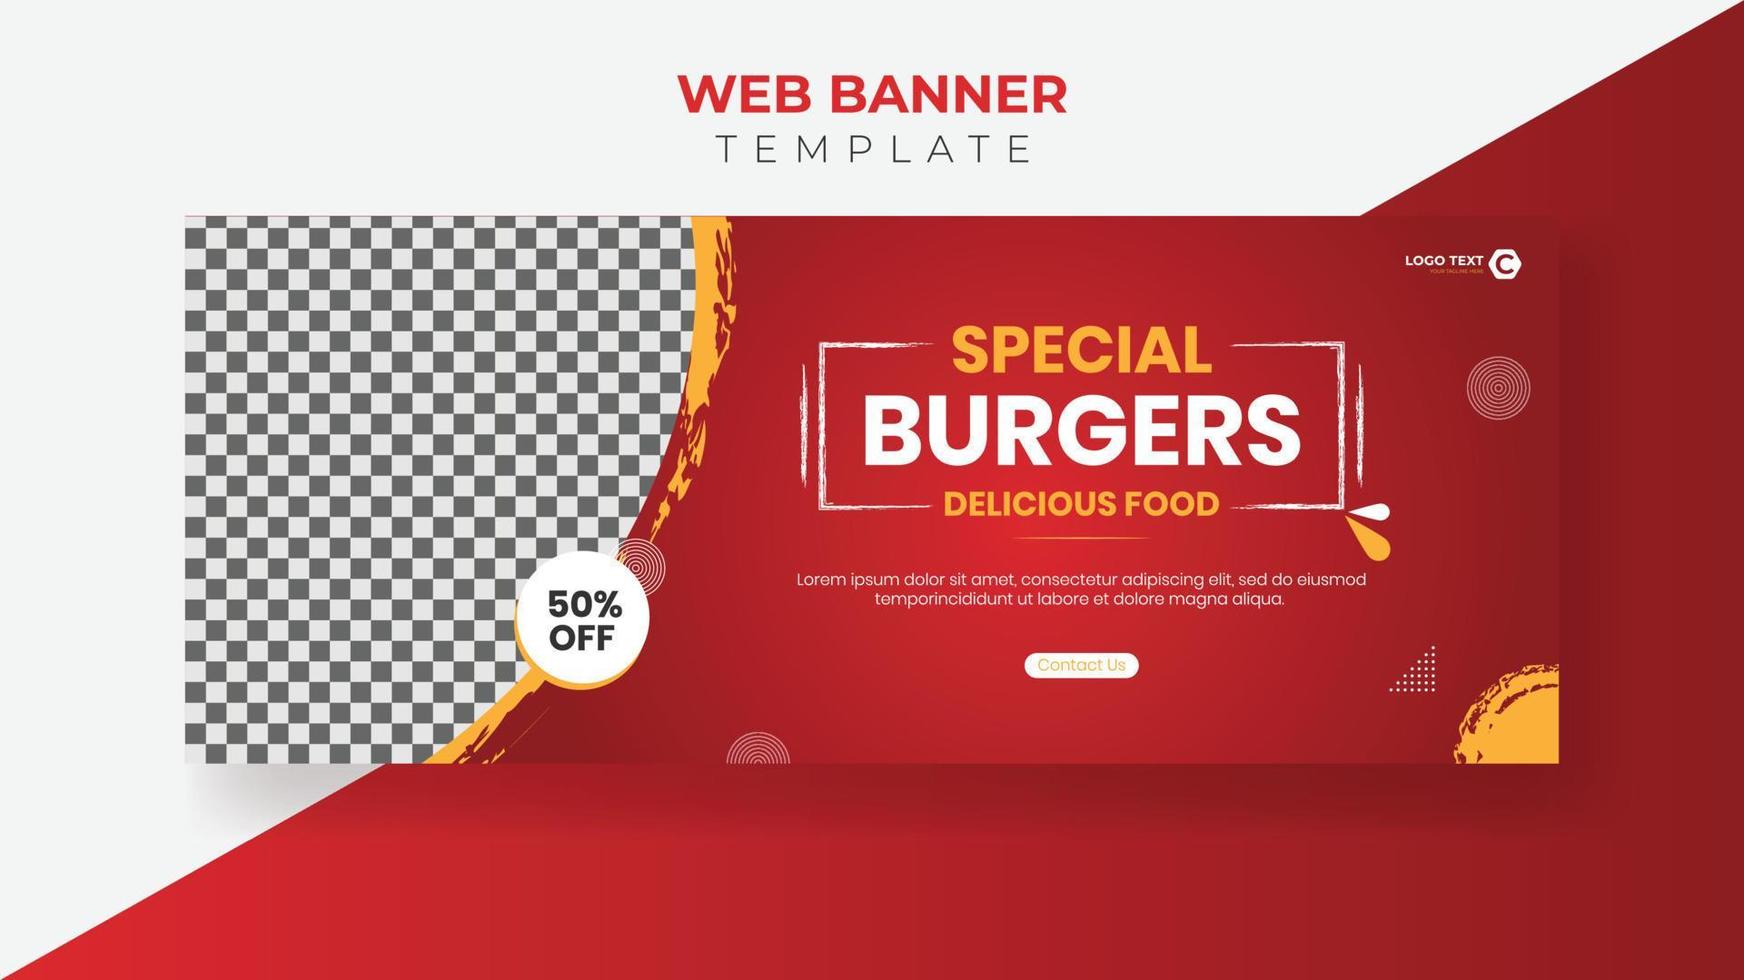 Restaurant and fast food social media web banner template vector